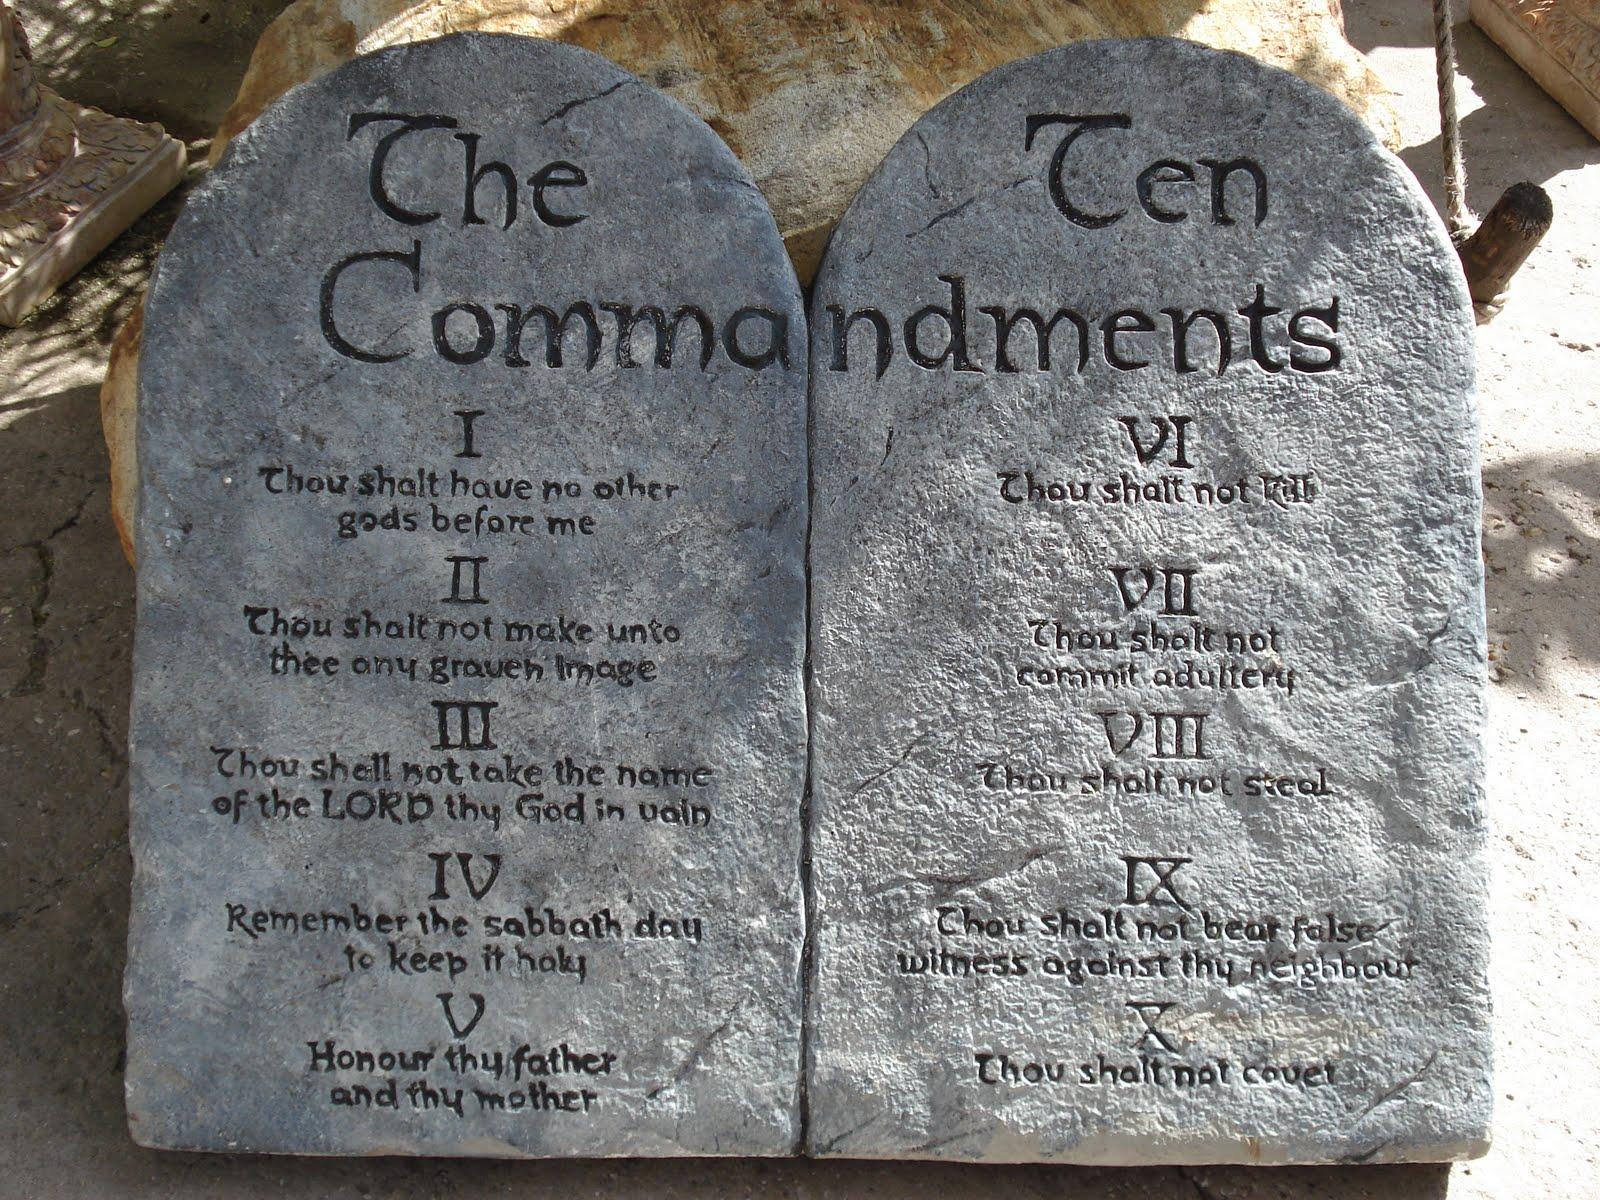 What is the Origin of the Ten Commandments?